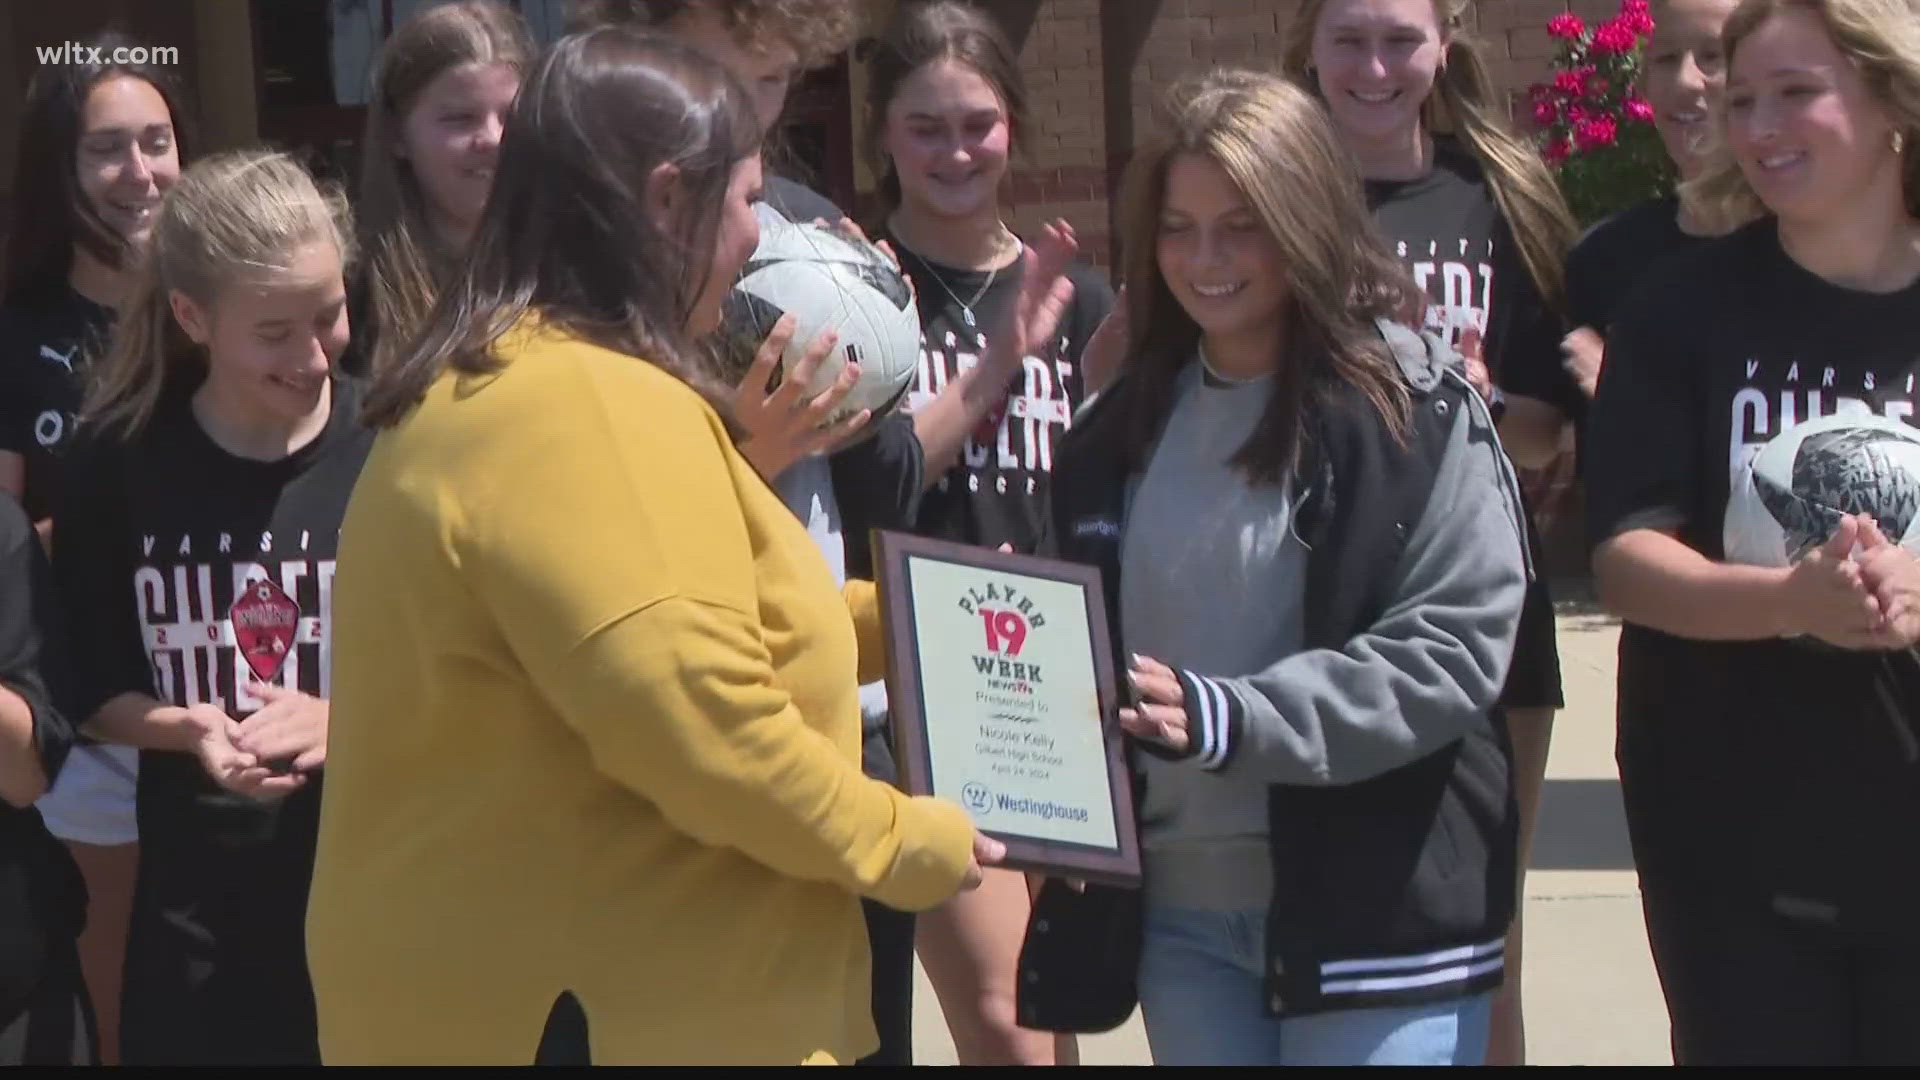 Gilbert senior soccer player Nicole Kelly is a News19 Player of the Week